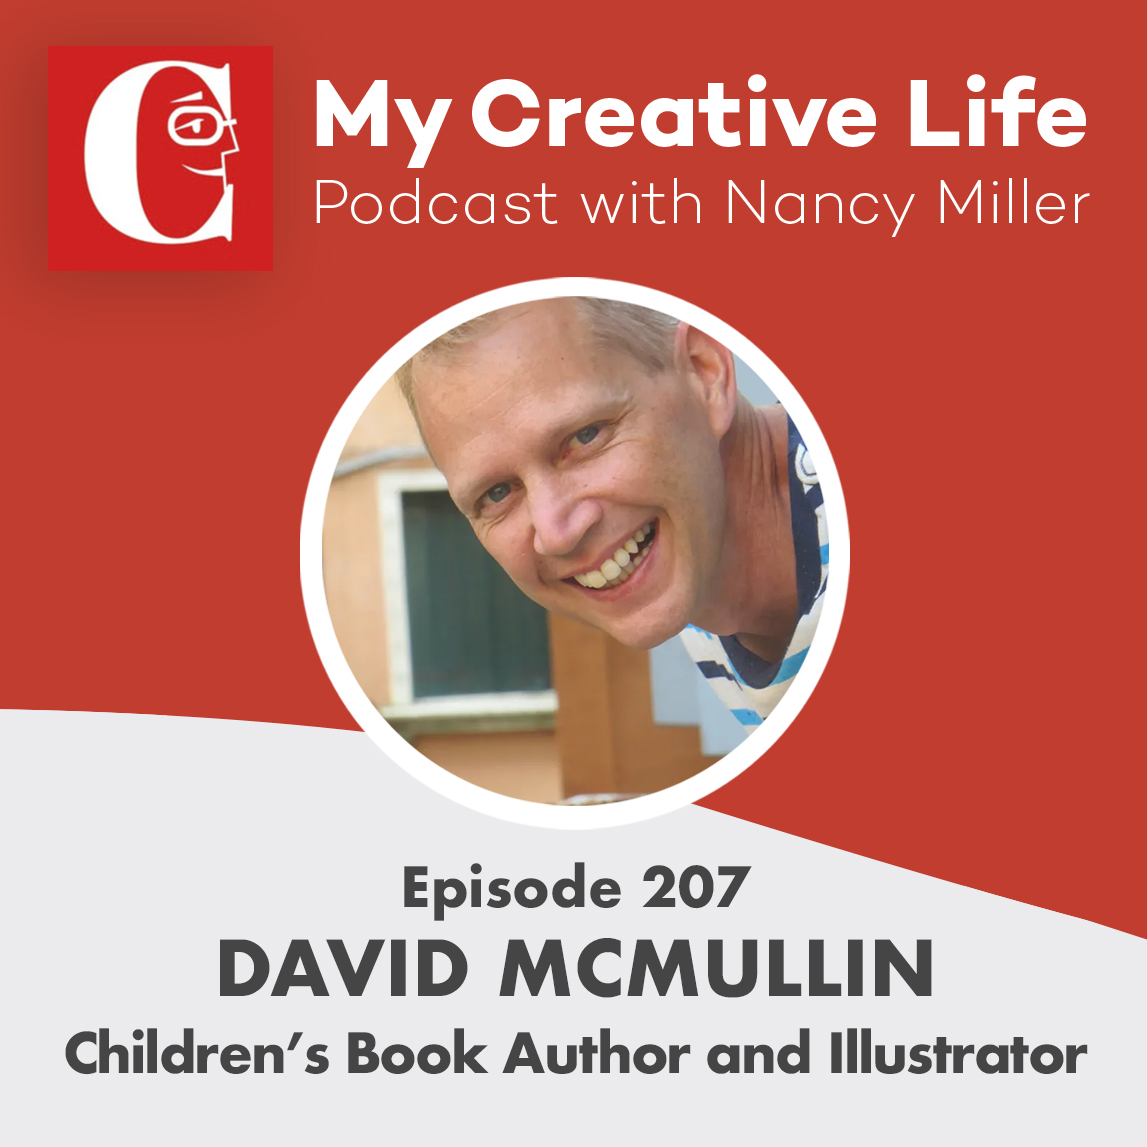 I interviewed @davidmcmullinpb about his debut picture book, Free to Be Fabulous, amazingly illus by @RobbieCathro published by @ClarionBooks. Launching 4/30/24!

Listen: anchor.fm/nmillerillustr…
David's site: davidmcmullinbooks.com

#podcast #kidlitauthor